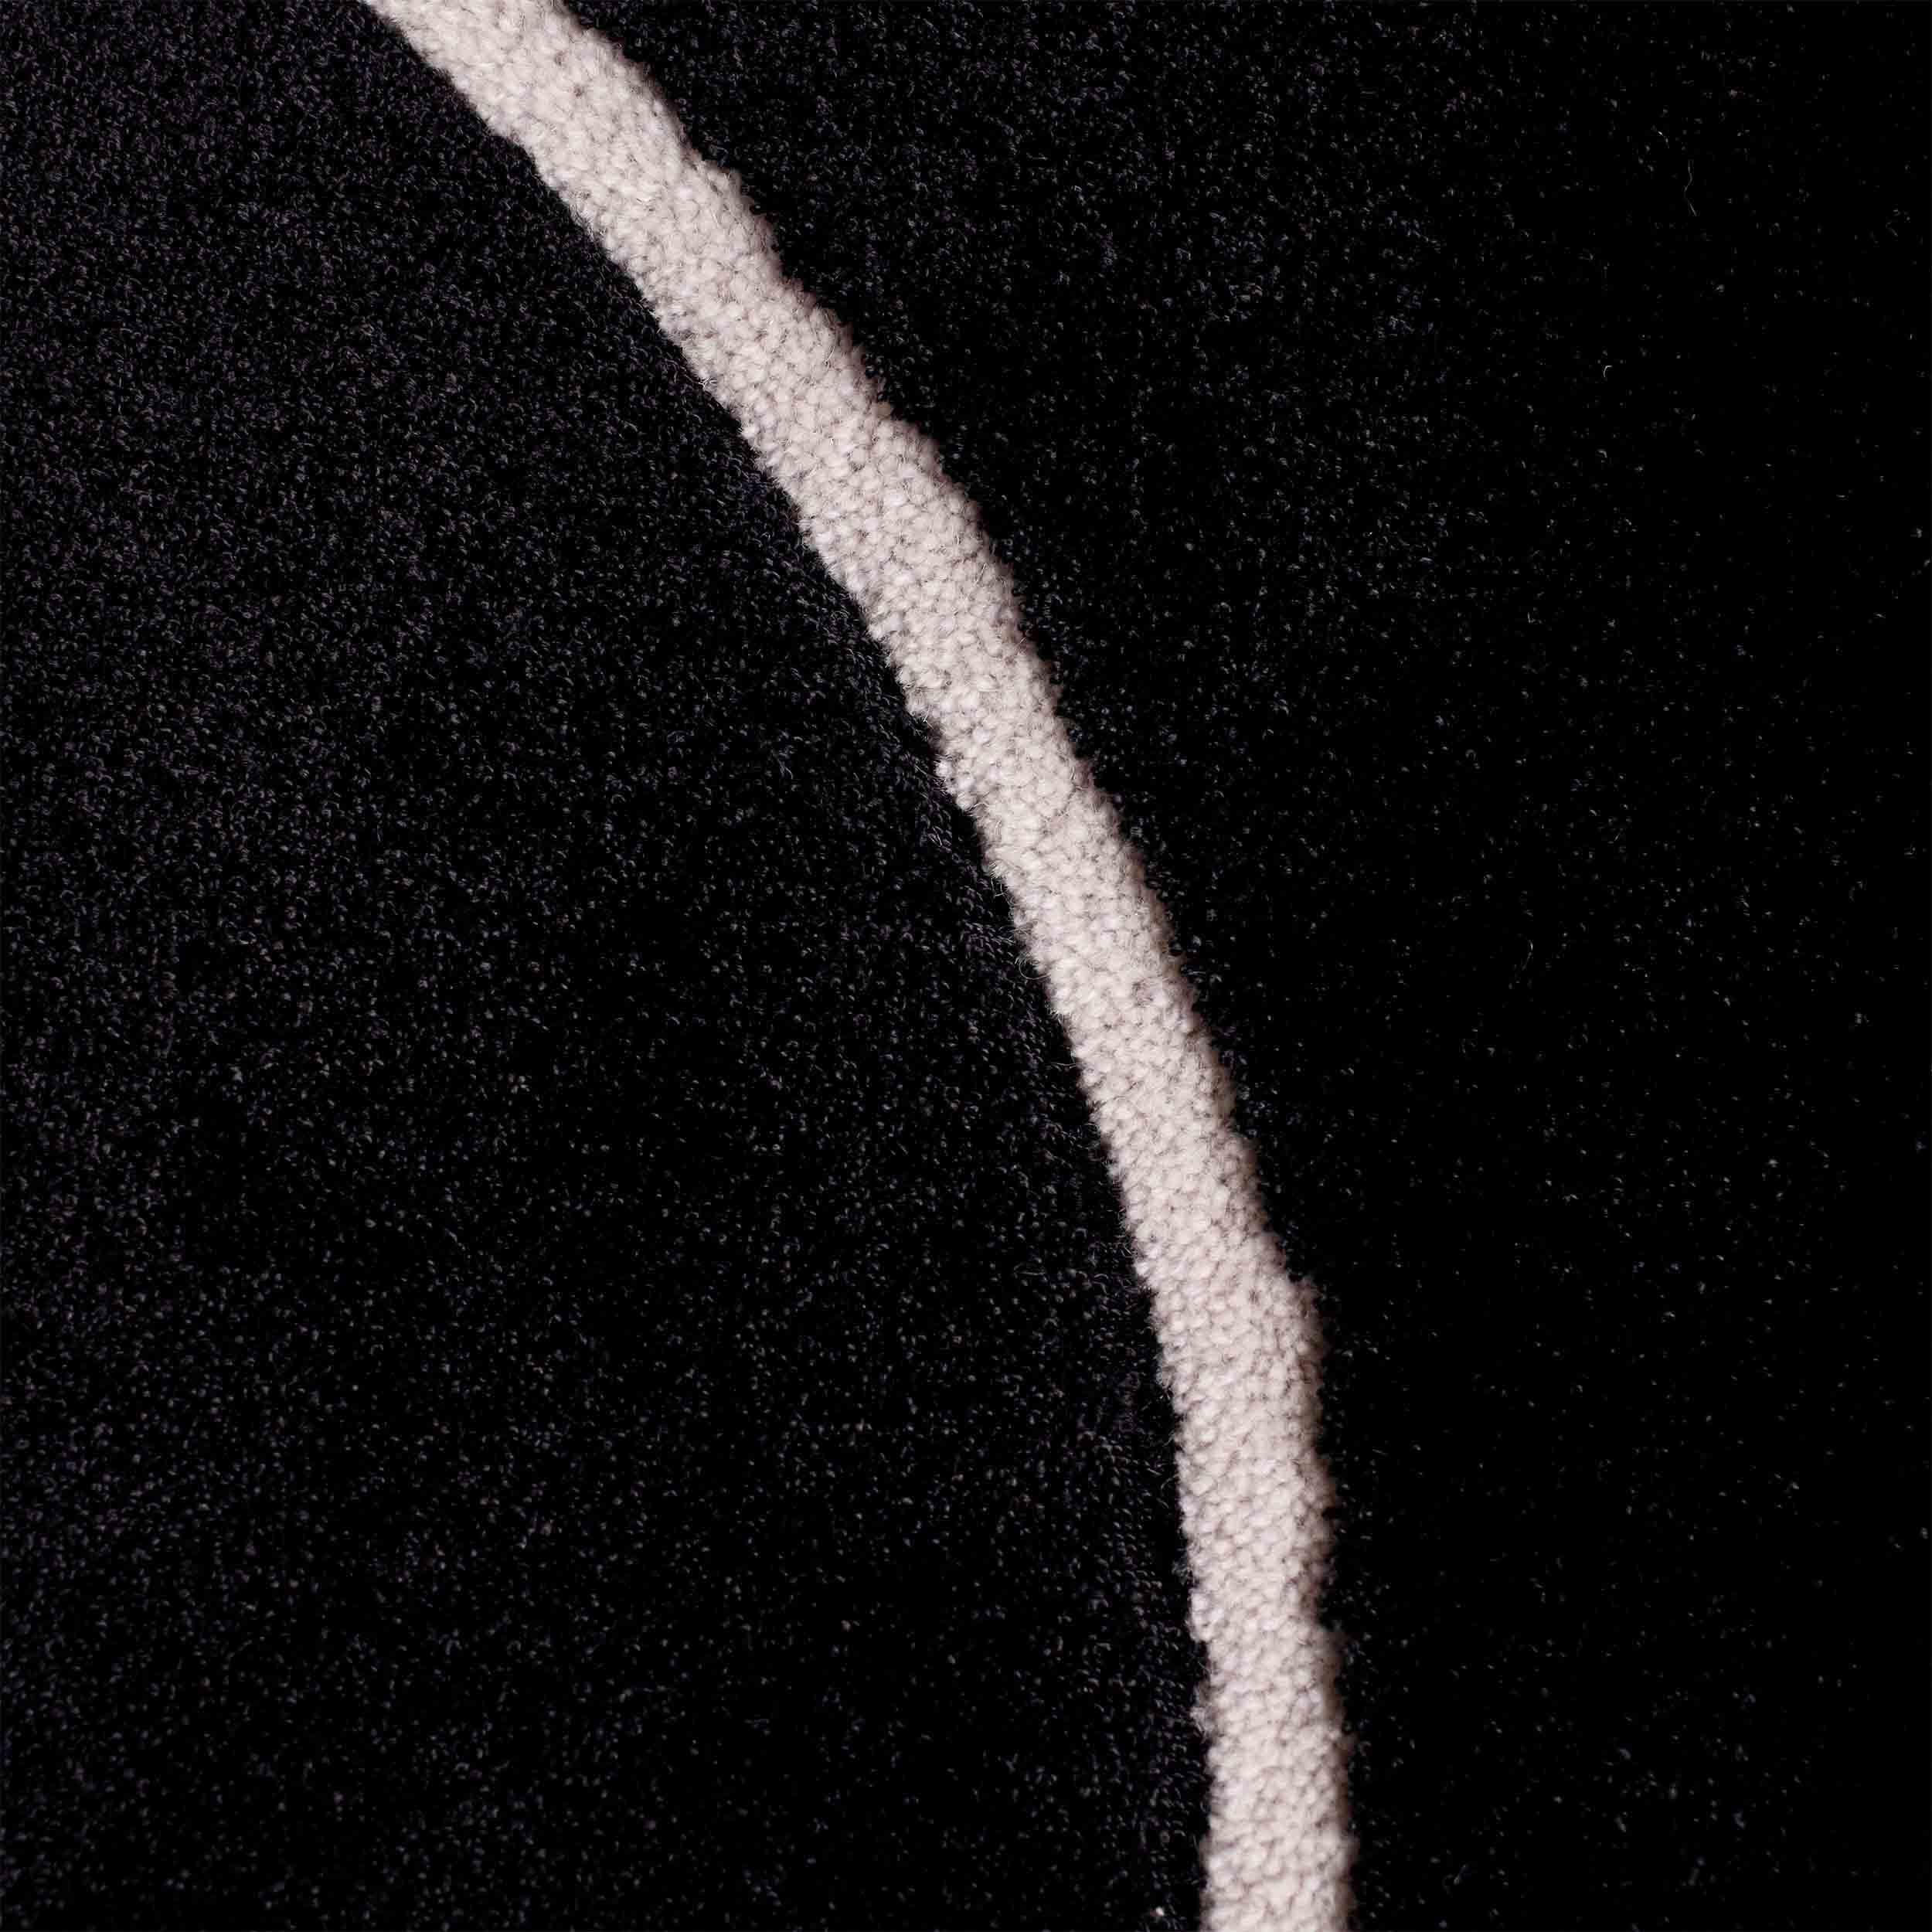 Midnight Black Squiggle features a soft and shiny viscose surface.

Size: 4 x 5.5 ft 
Material: Viscose + Wool
Color: Black + White*
Made in Sweden

*Colors may vary due to lighting and photography